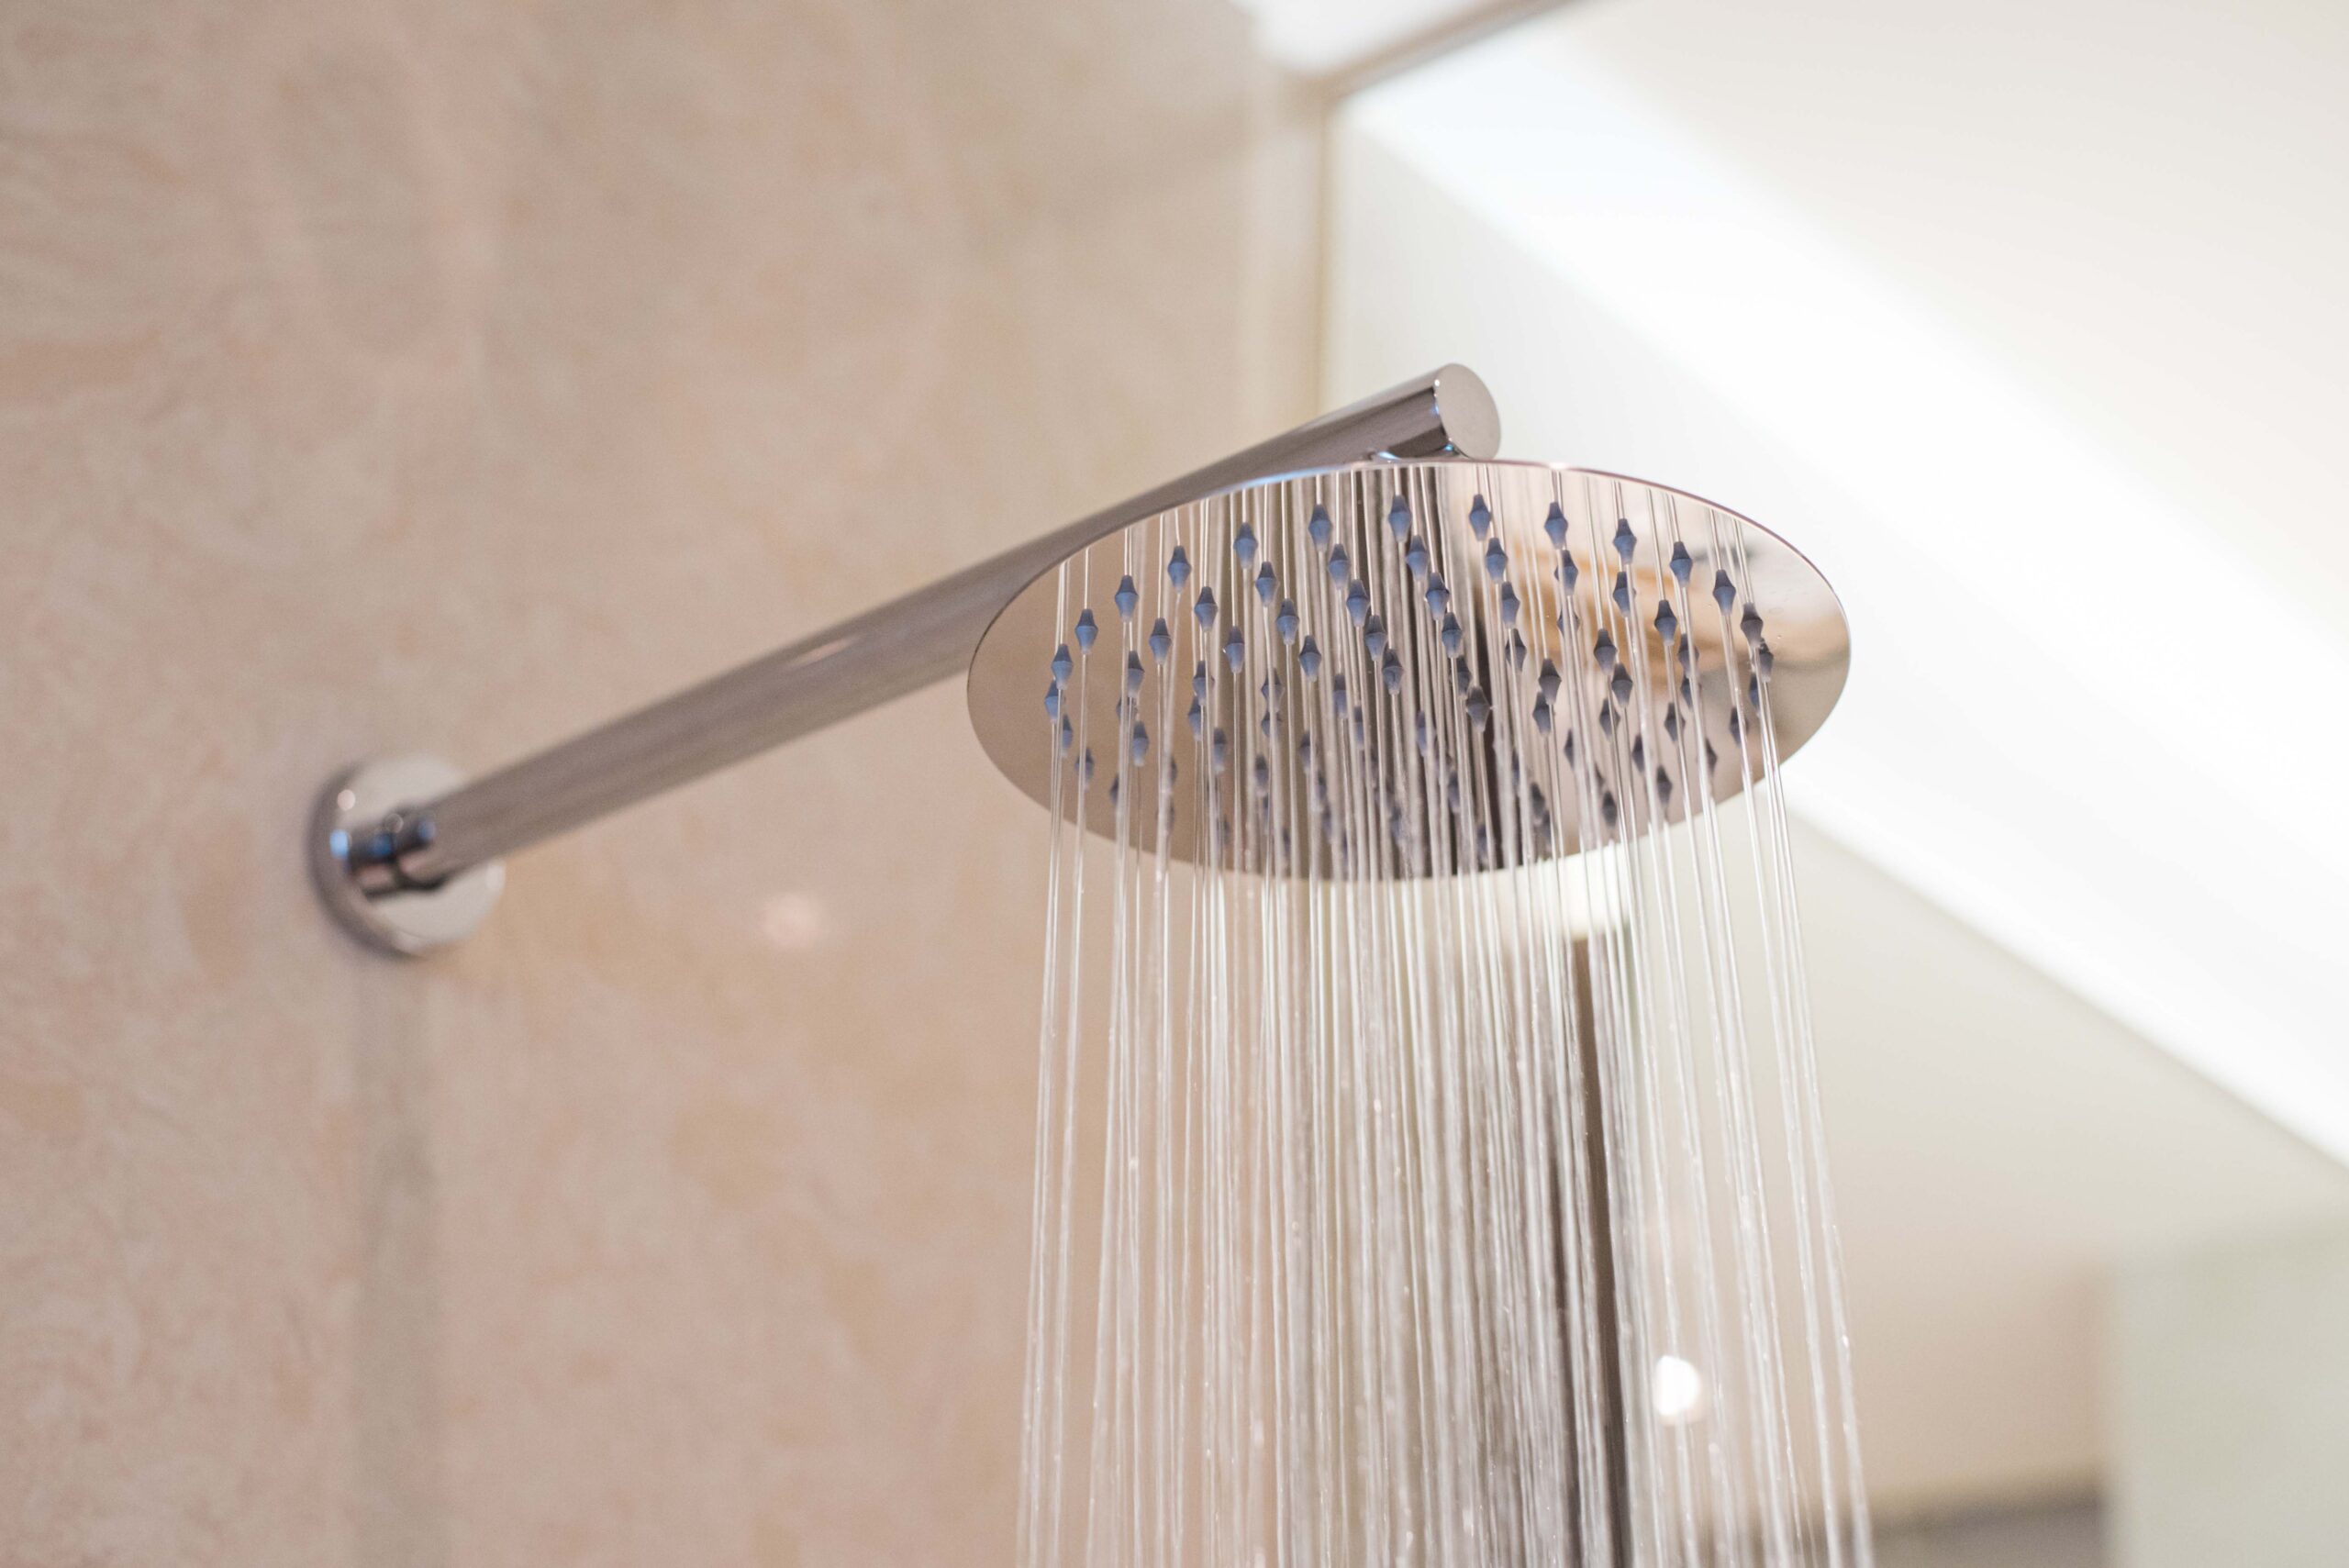 Continuous hot water for showers